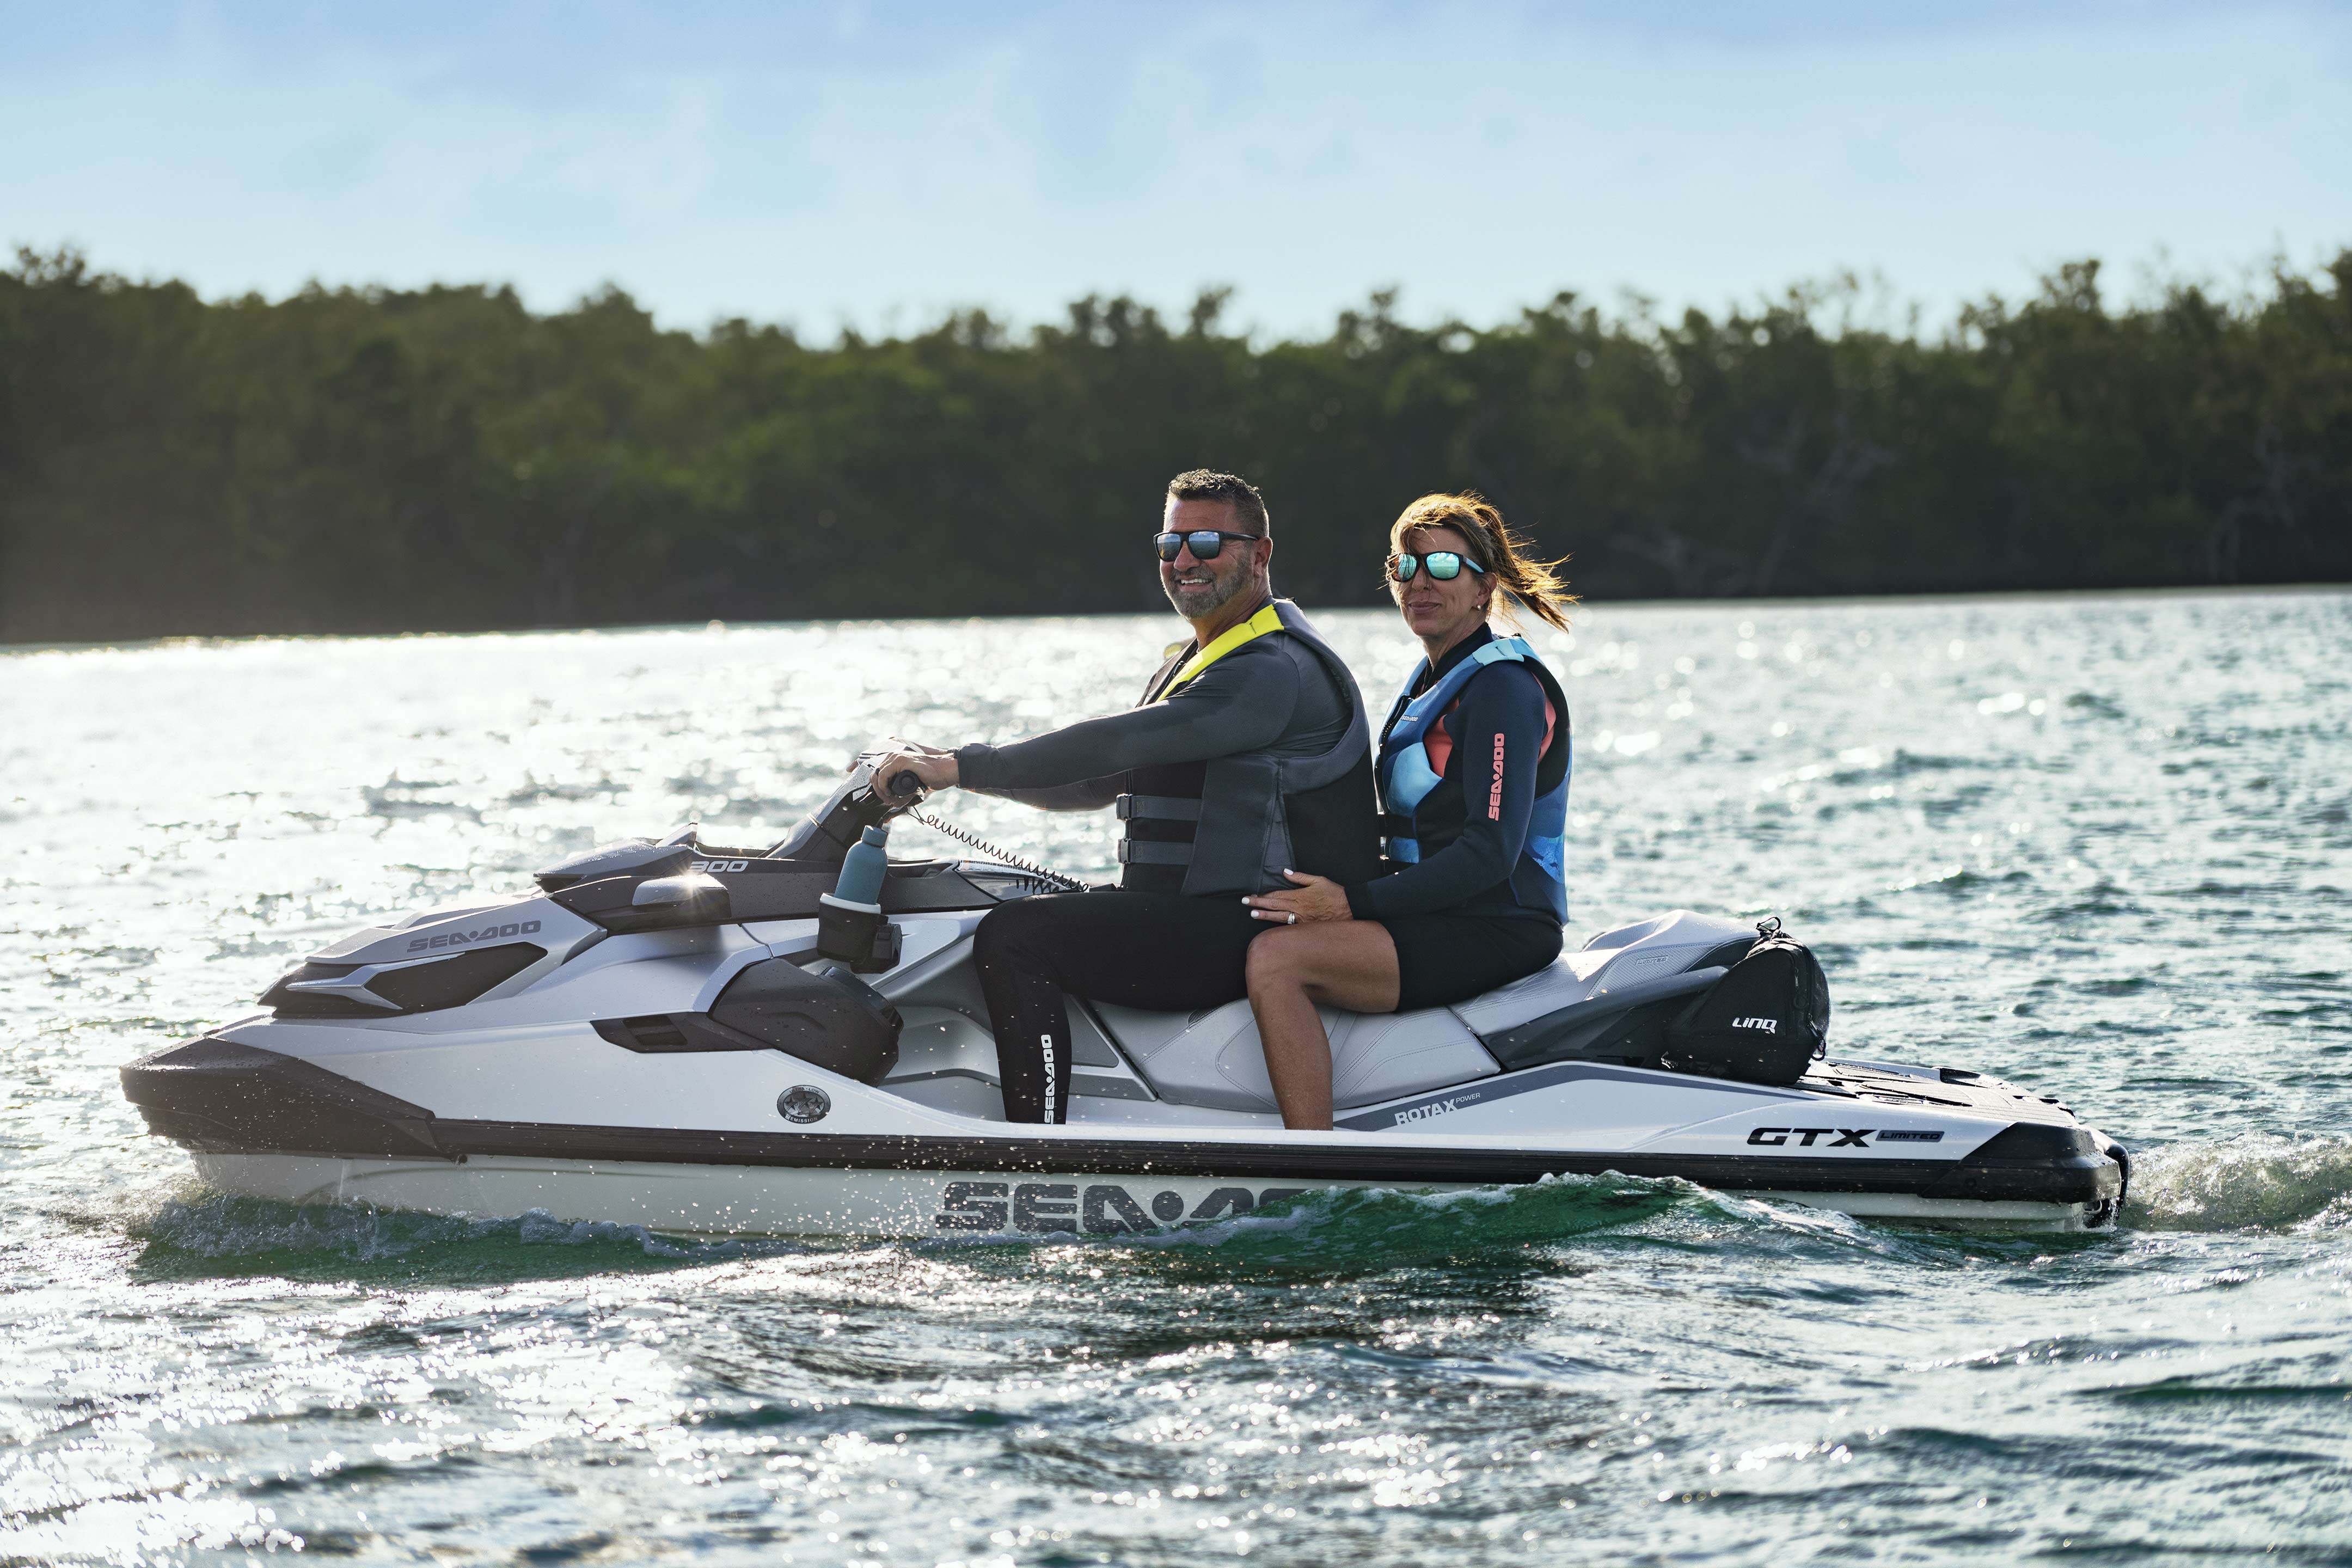 Man and woman sitting on a Sea-Doo GTX Limited personal watercraft